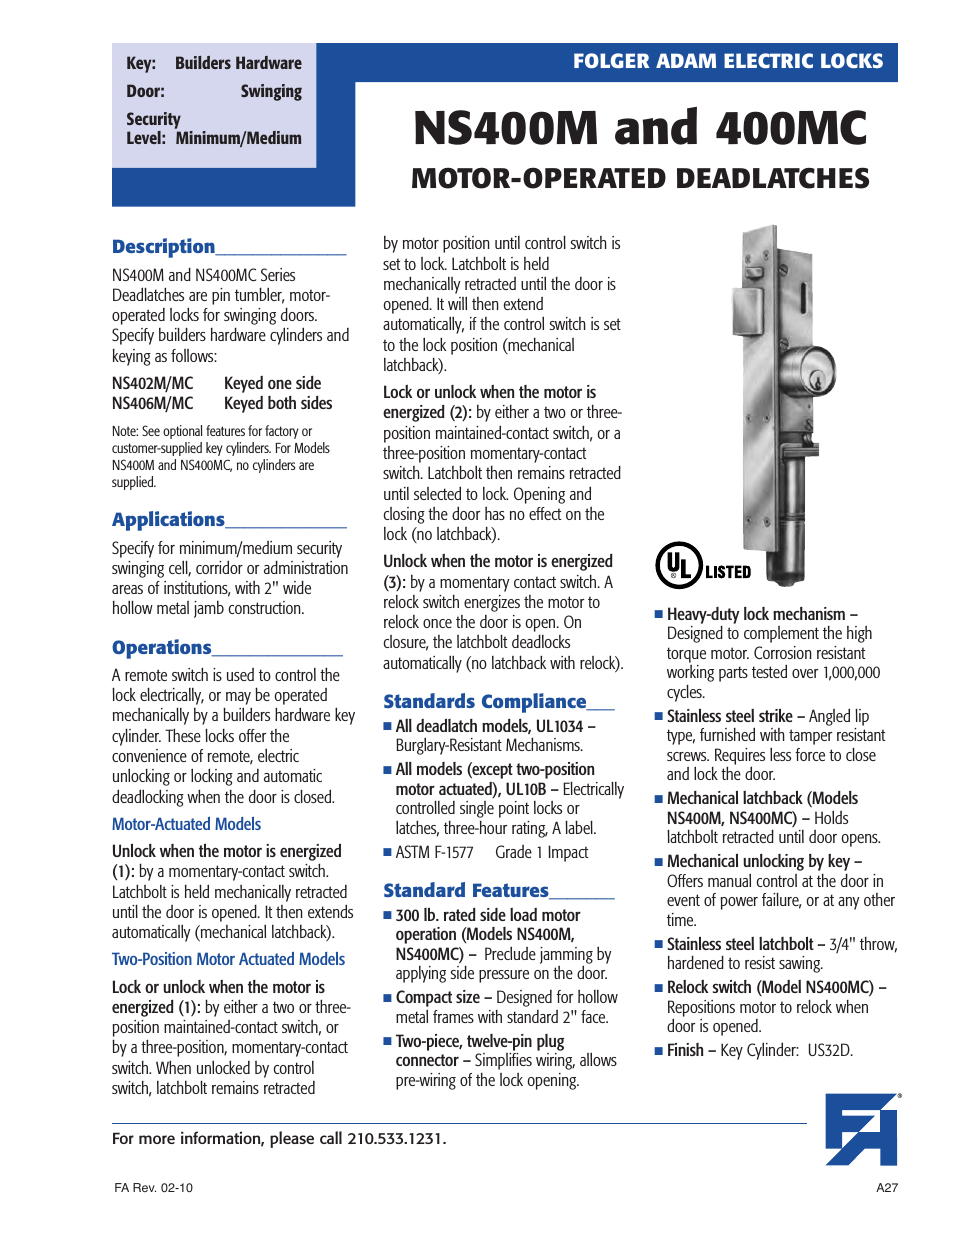 NS400M and 400MC MOTOR-OPERATED DEADLATCHES